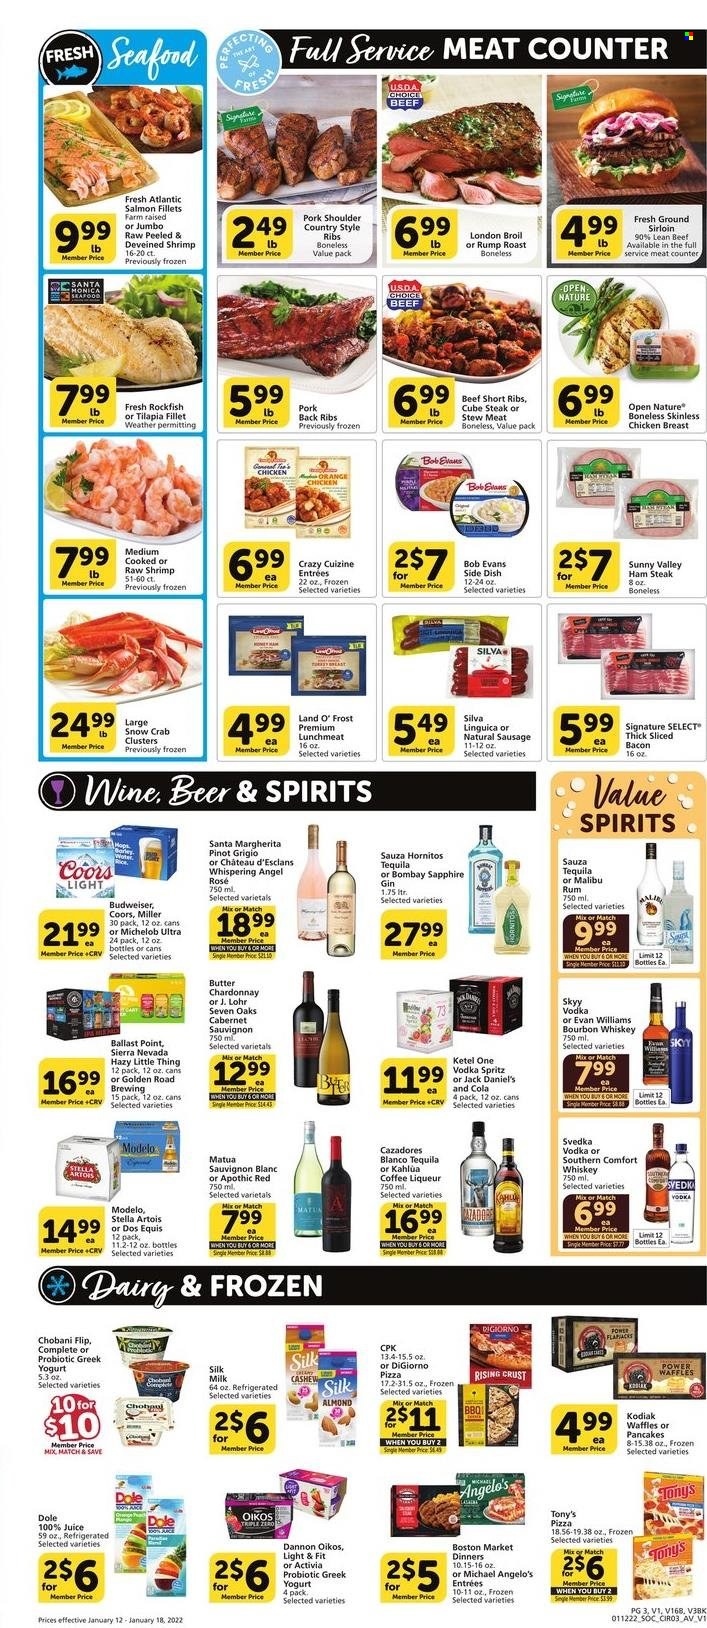 thumbnail - Albertsons Flyer - 01/12/2022 - 01/18/2022 - Sales products - stew meat, waffles, Dole, oranges, rockfish, salmon, salmon fillet, tilapia, crab, shrimps, Jack Daniel's, pizza, Bob Evans, bacon, ham, sausage, lunch meat, ham steaks, greek yoghurt, yoghurt, Oikos, Chobani, Dannon, milk, butter, juice, coffee, Kahlúa, Cabernet Sauvignon, red wine, white wine, Chardonnay, Pinot Grigio, Sauvignon Blanc, rosé wine, gin, liqueur, rum, tequila, vodka, whiskey, SKYY, Malibu, bourbon whiskey, whisky, beer, Miller, Modelo, chicken breasts, beef meat, beef ribs, steak, pork meat, pork ribs, pork shoulder, pork back ribs, country style ribs, Budweiser, Stella Artois, Coors, Dos Equis, Michelob. Page 3.